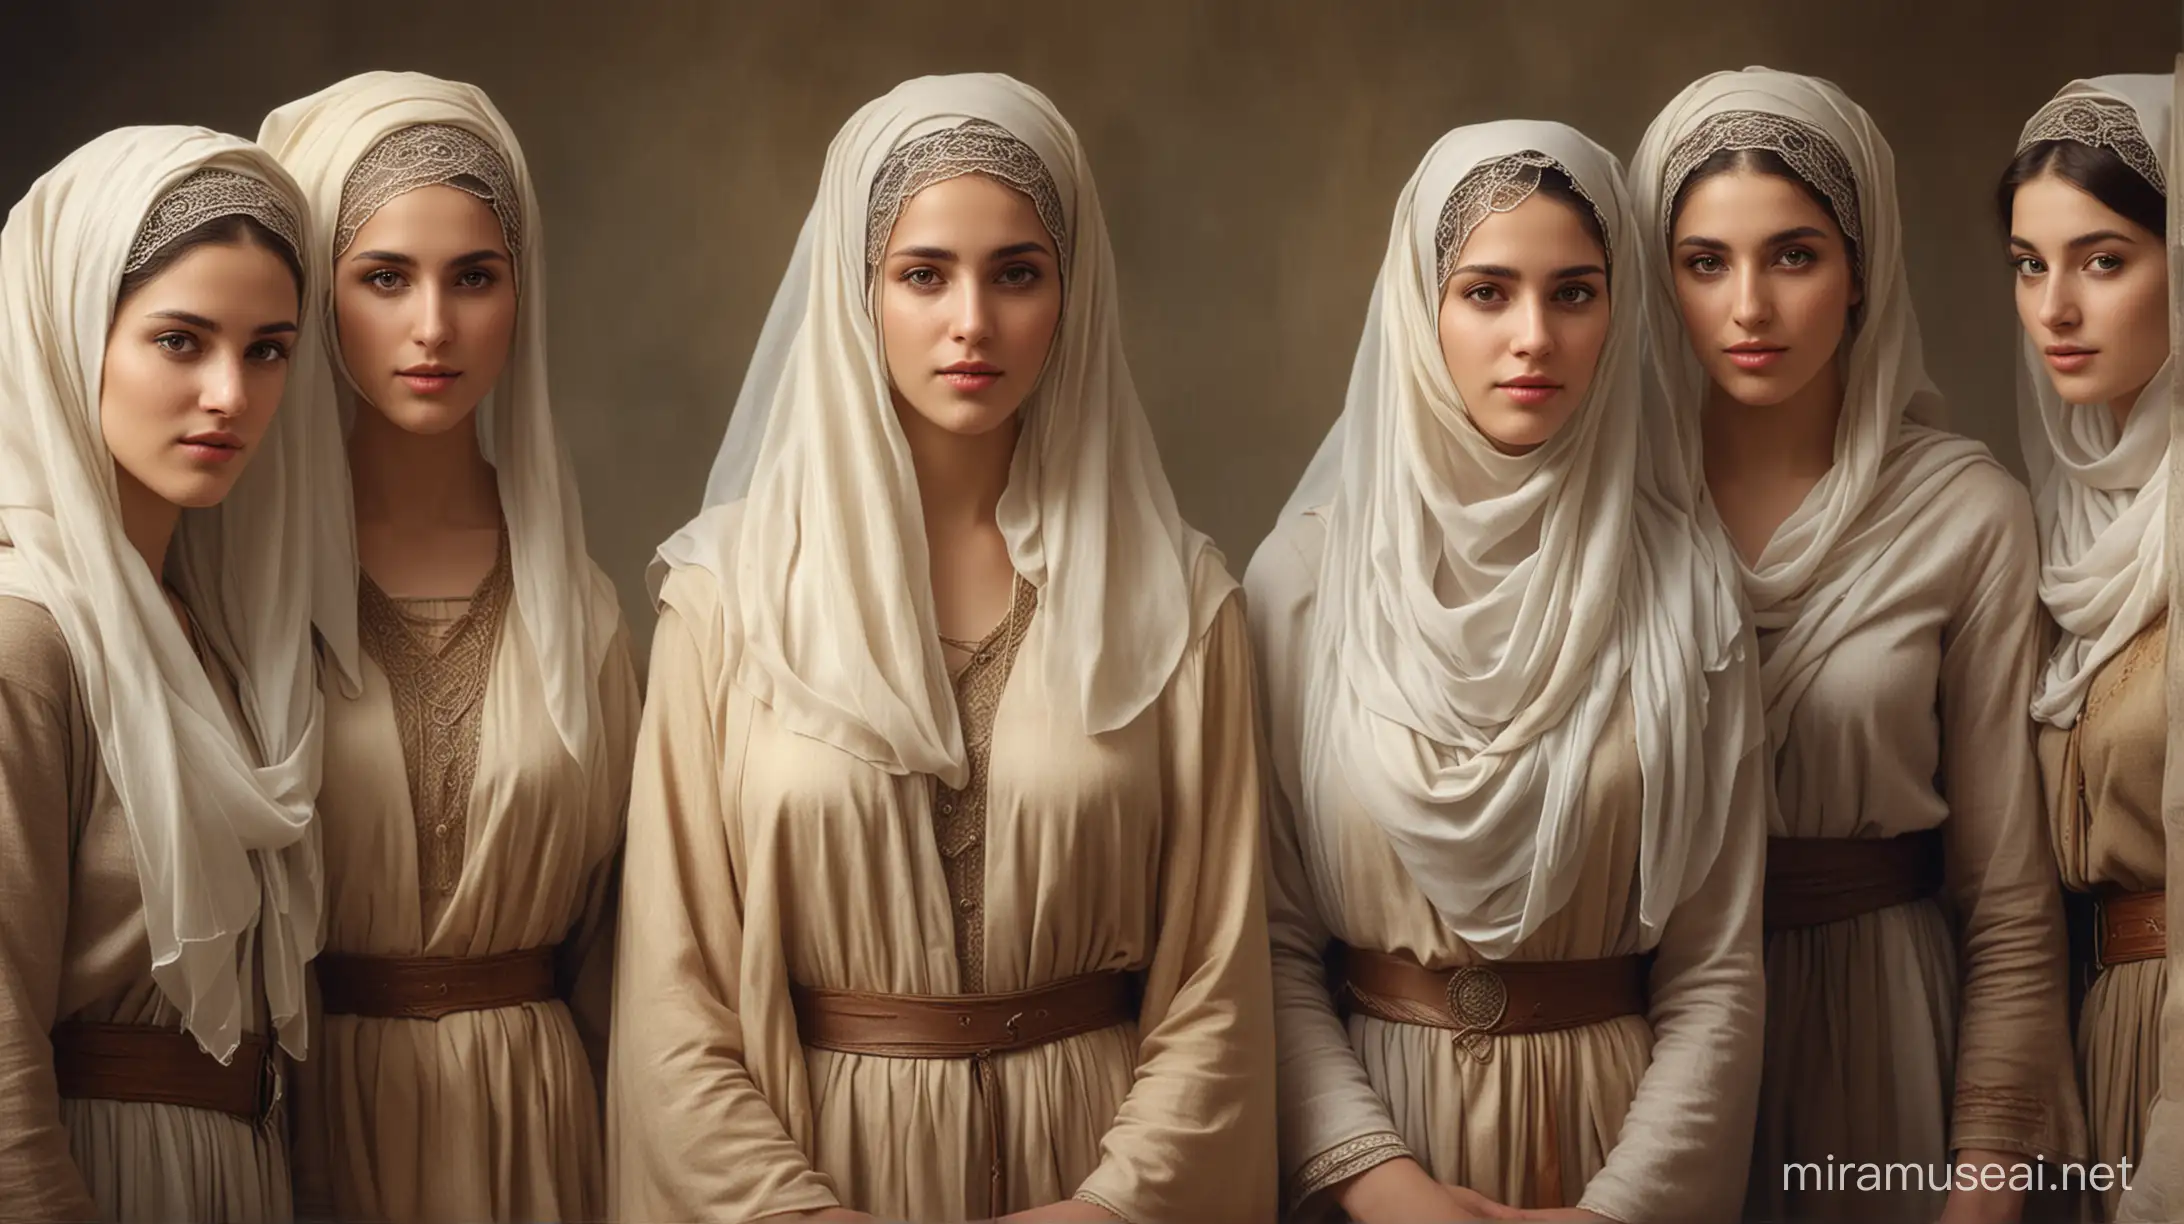 Graceful Ancient Jerusalem Women in Traditional Veiled Attire